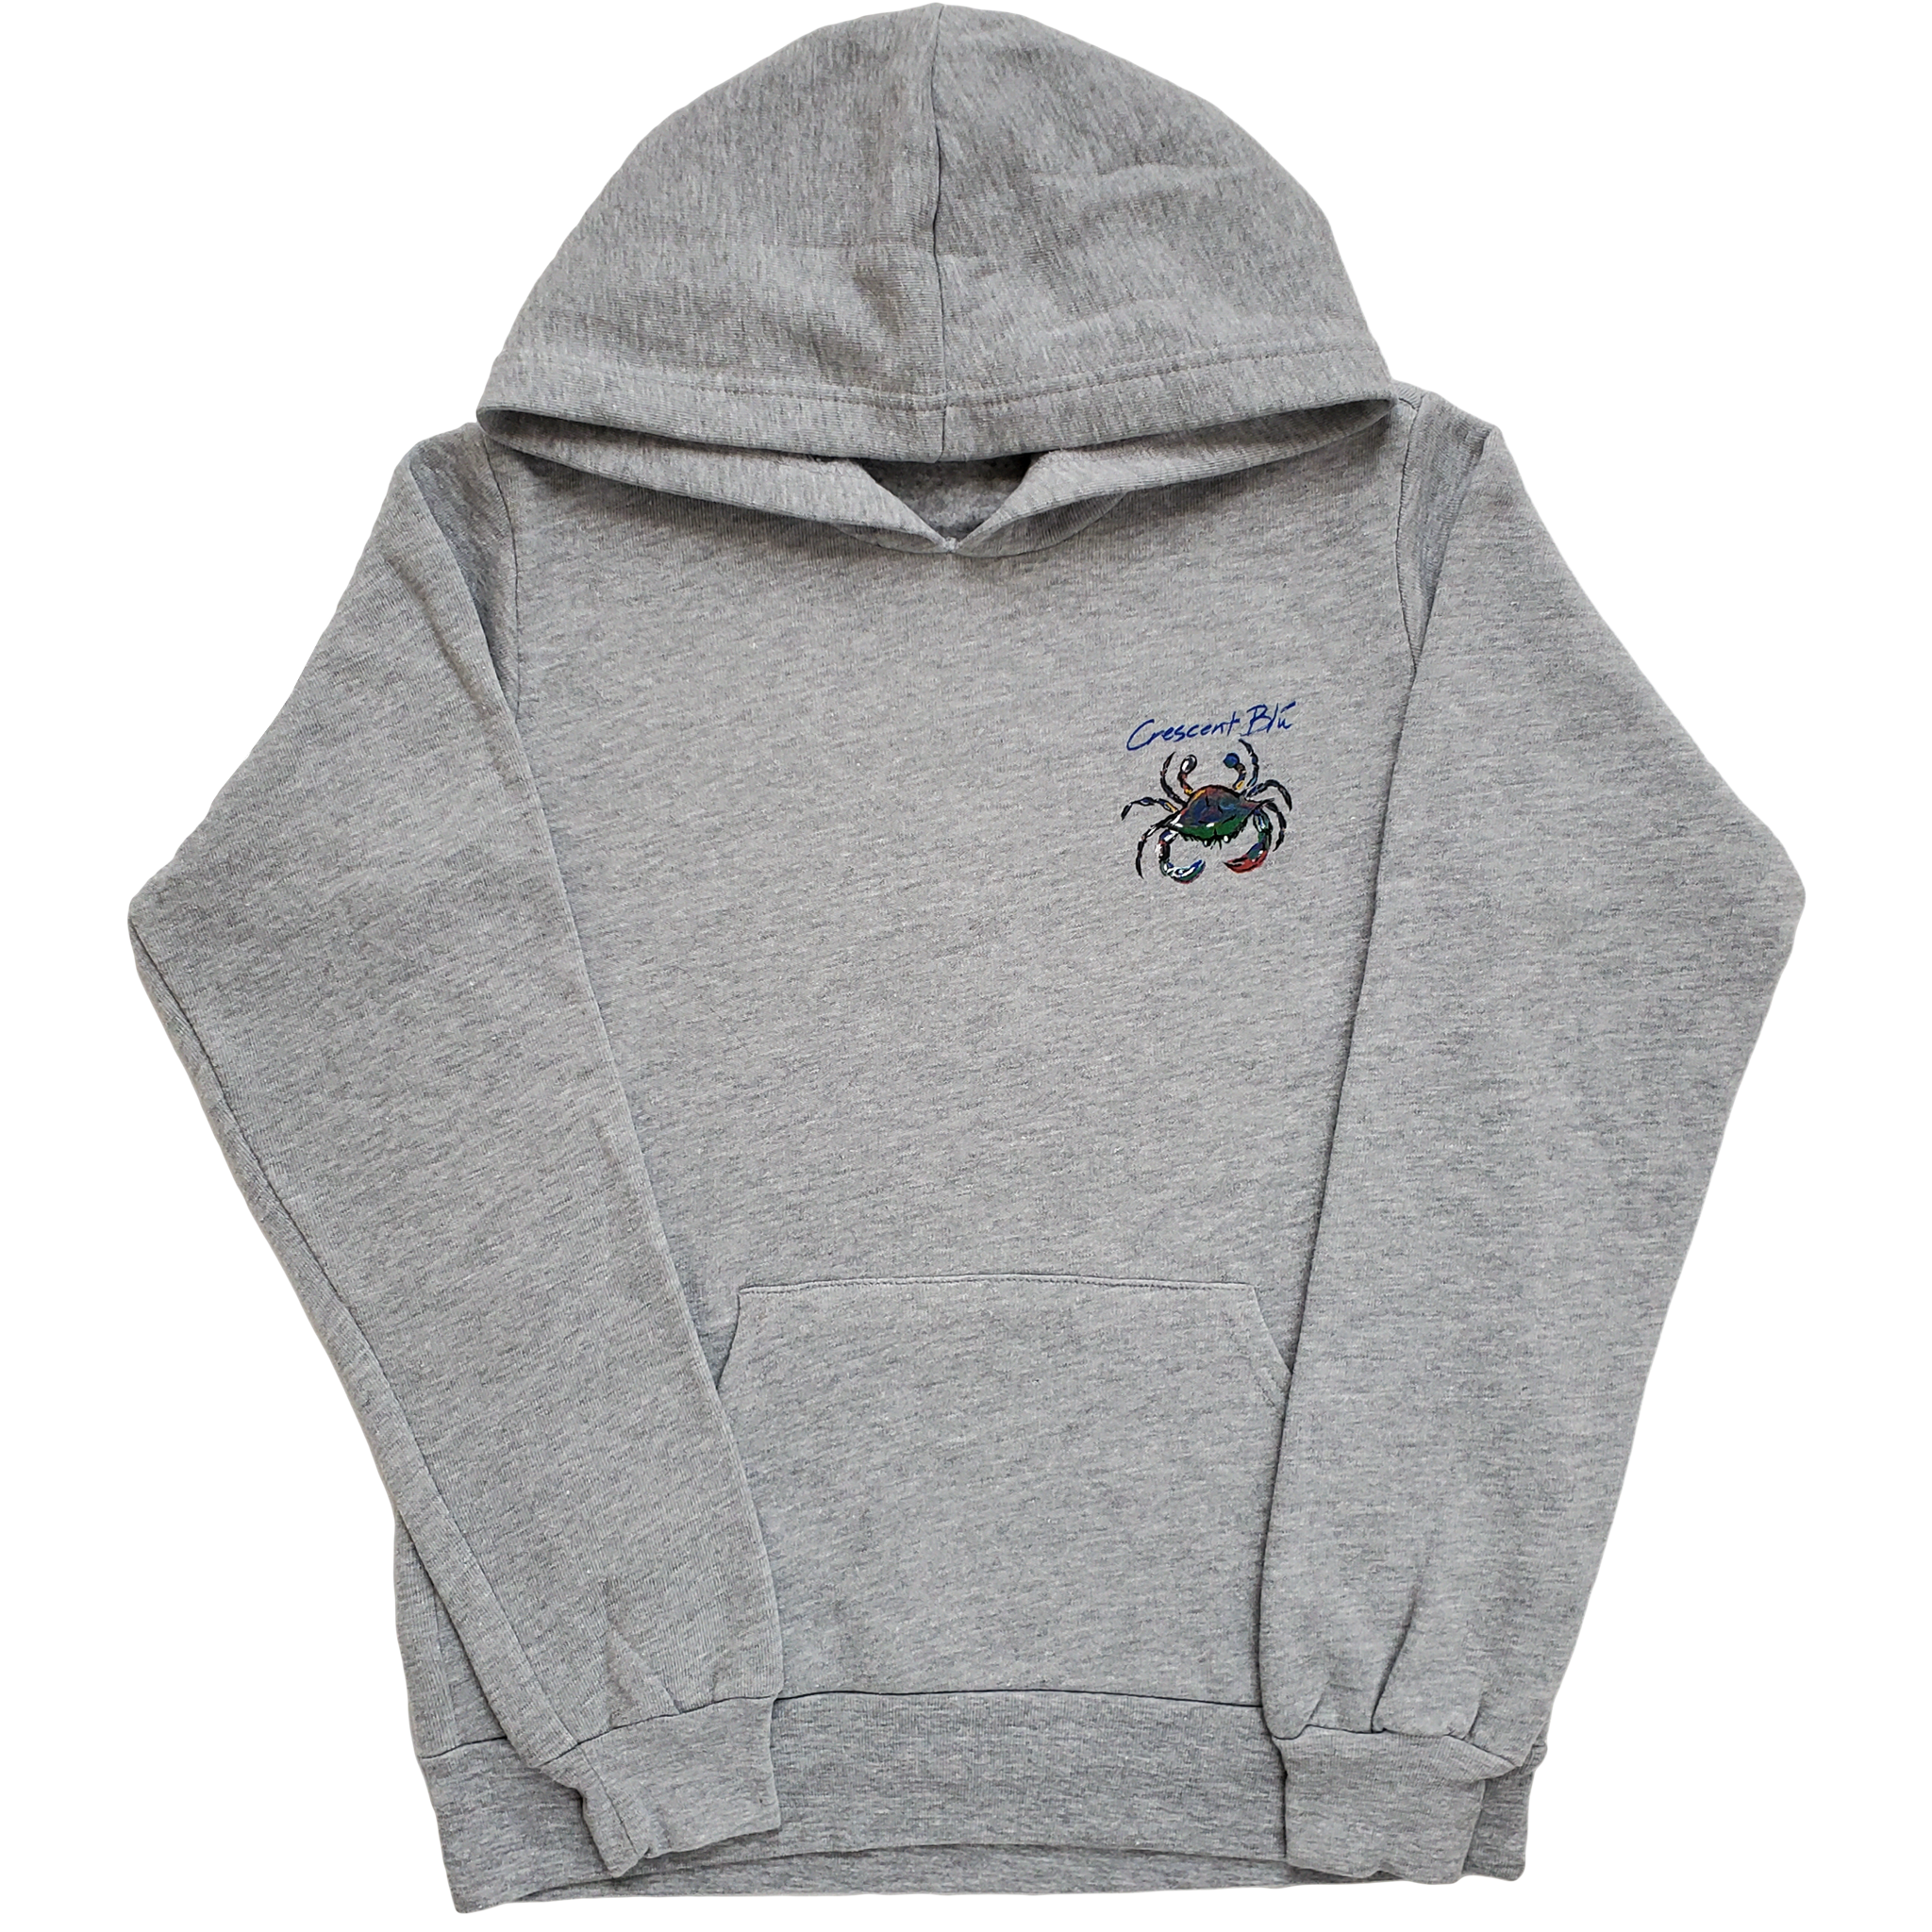 Heather grey youth sponge fleece hooded sweatshirt with center pocket pouch and ribbed cuffs and a ribbed hem. Crescent Blu's blue crab on the left chest.  